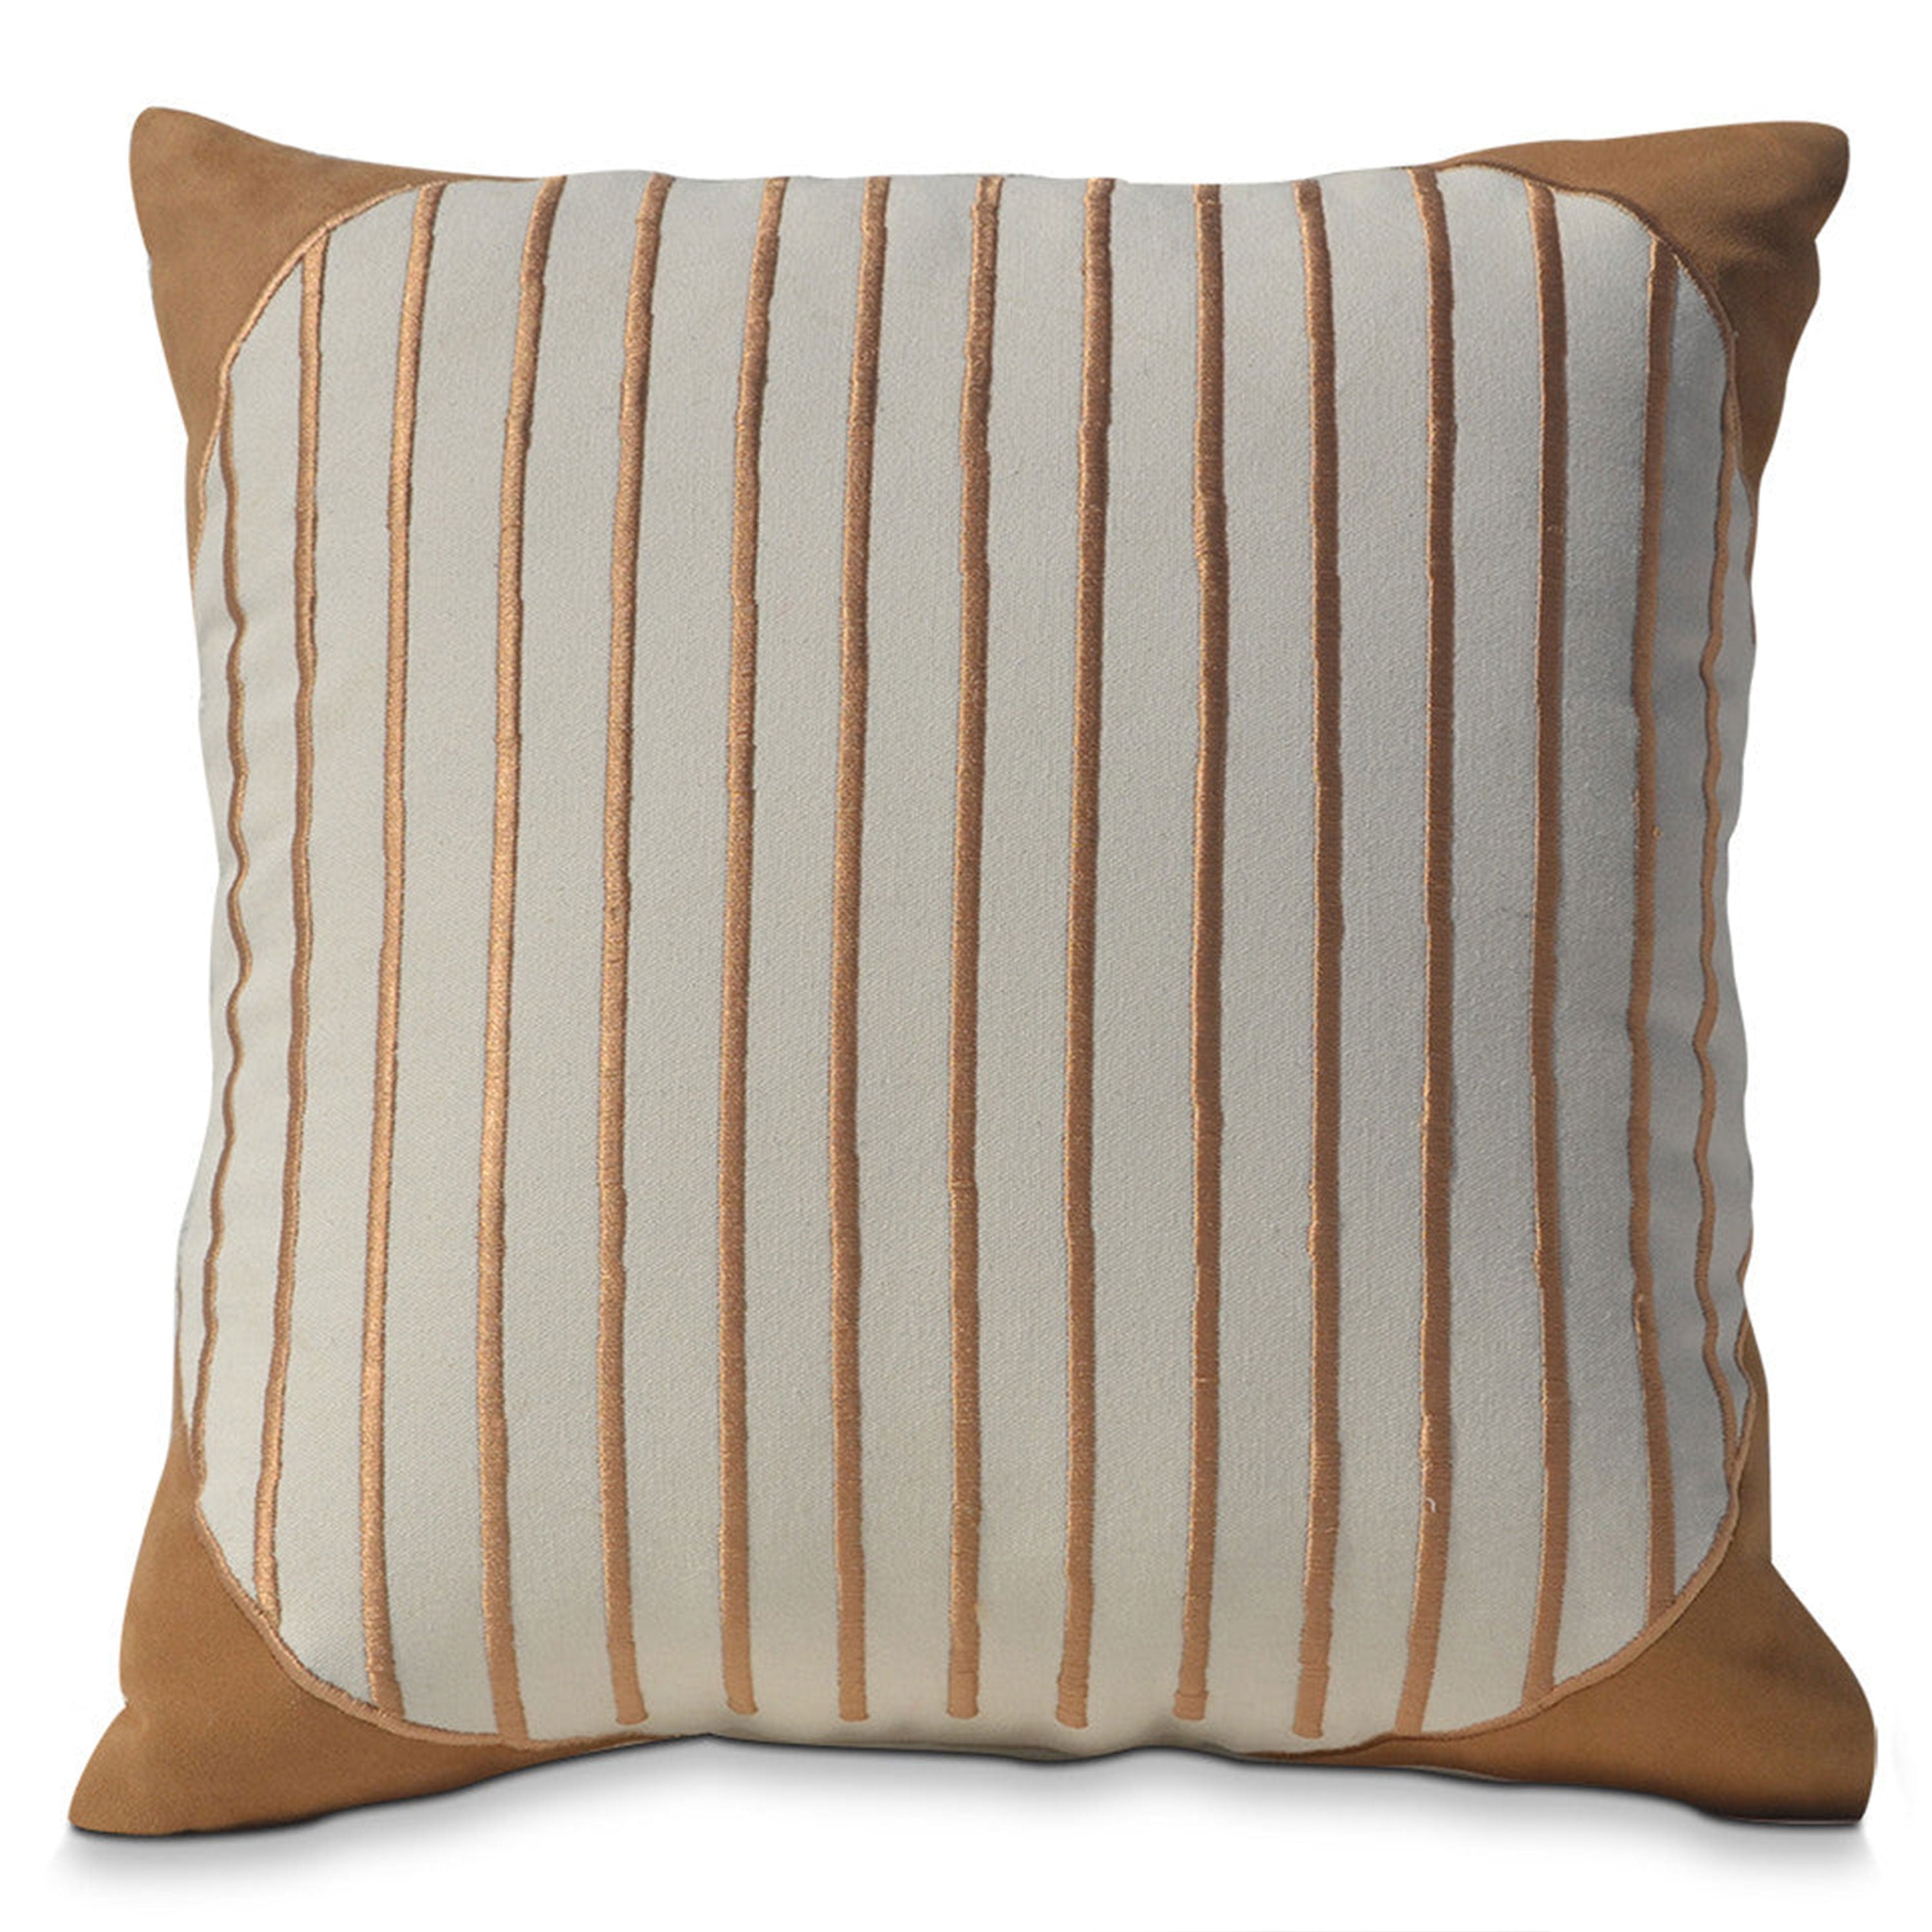 Geometric Stripes Hand Embroidered Decorative Cotton Pillow Cover